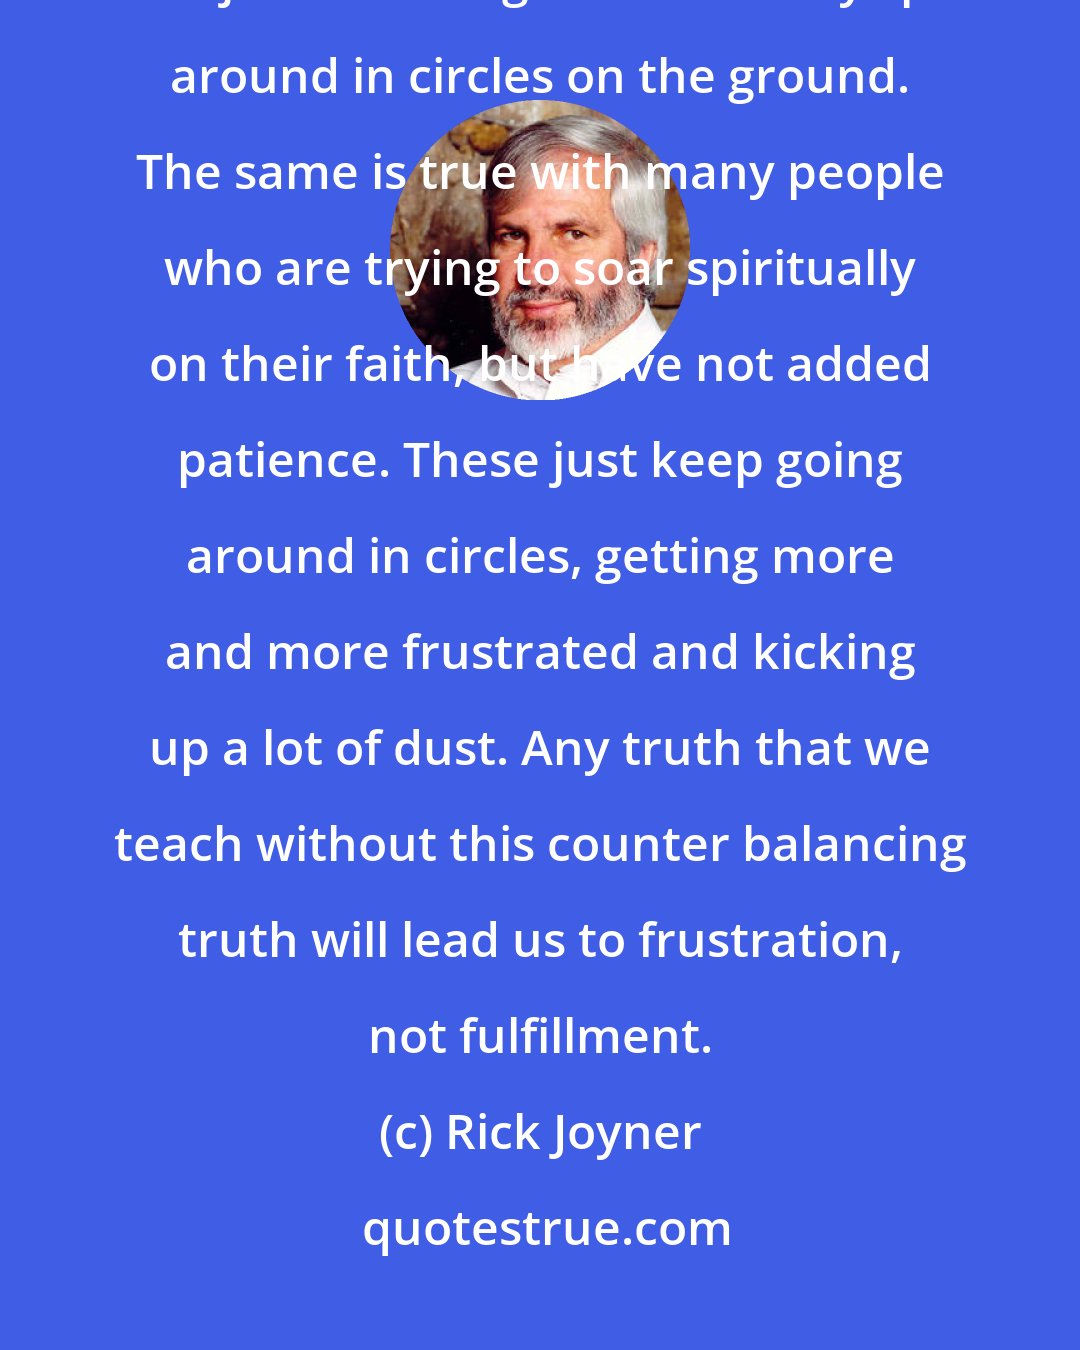 Rick Joyner: It takes two wings for an eagle to fly. If an eagle were to try to fly with just one wing he would only spin around in circles on the ground. The same is true with many people who are trying to soar spiritually on their faith, but have not added patience. These just keep going around in circles, getting more and more frustrated and kicking up a lot of dust. Any truth that we teach without this counter balancing truth will lead us to frustration, not fulfillment.